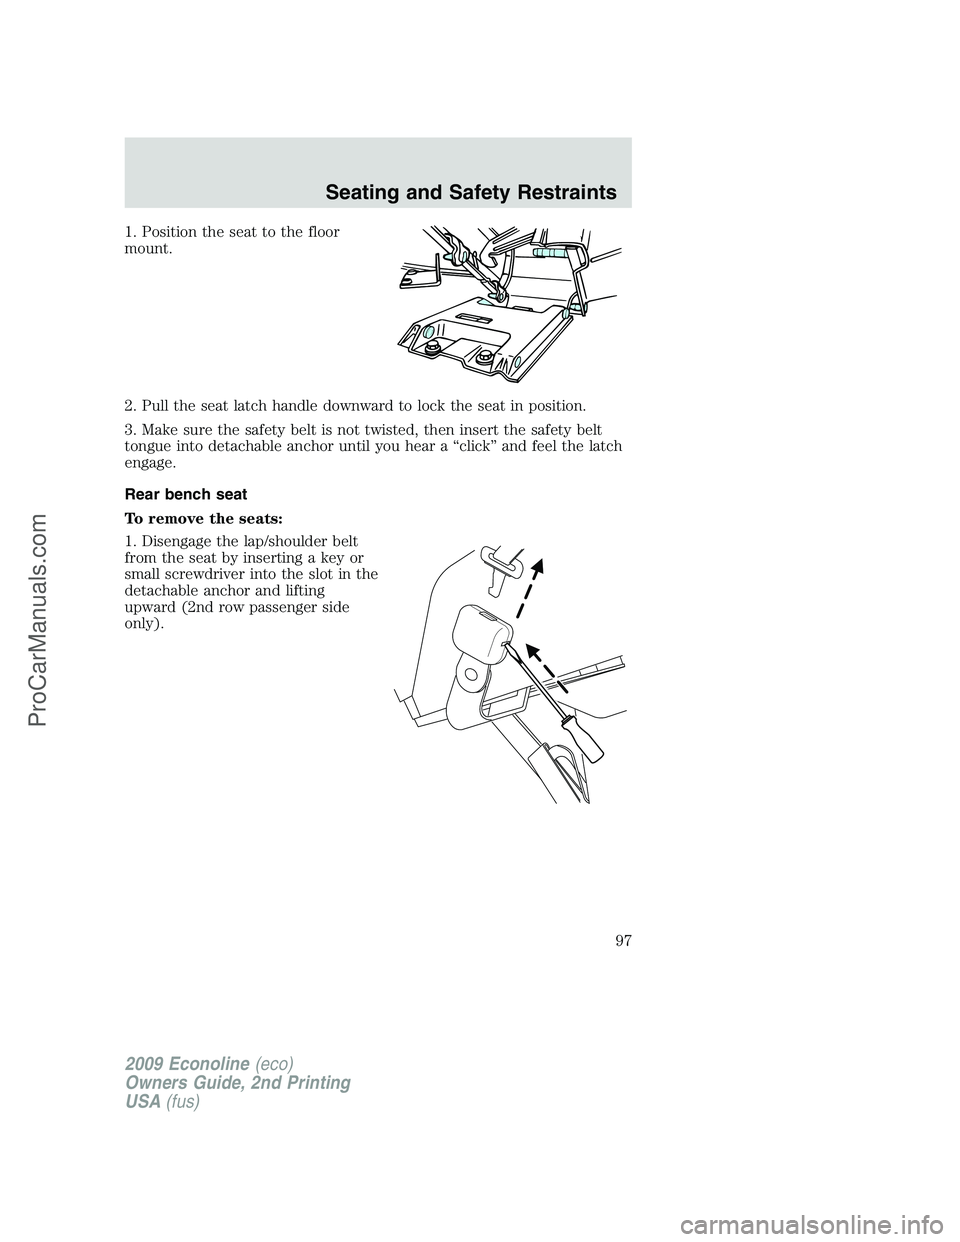 FORD ECONOLINE 2009  Owners Manual 1. Position the seat to the floor
mount.
2. Pull the seat latch handle downward to lock the seat in position.
3. Make sure the safety belt is not twisted, then insert the safety belt
tongue into detac